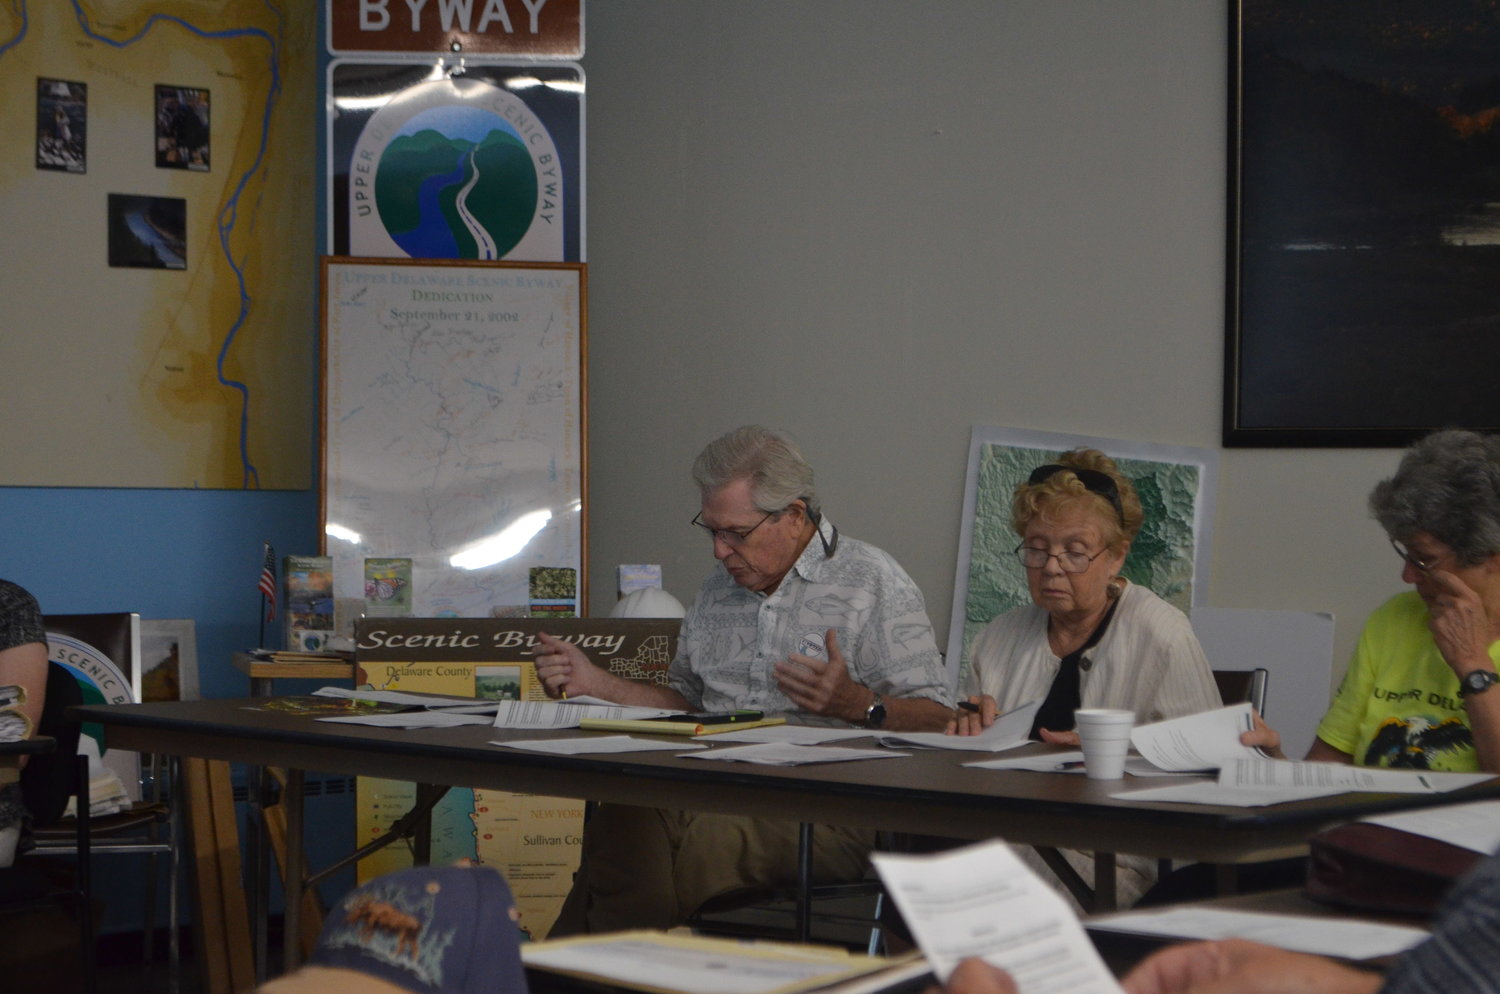 Upper Delaware Council chairperson and Highland representative Andy Boyar, left, discussing the Camp FIMFO project with Tusten representative Susan Sullivan and Deerpark representative Ginny Dudko.